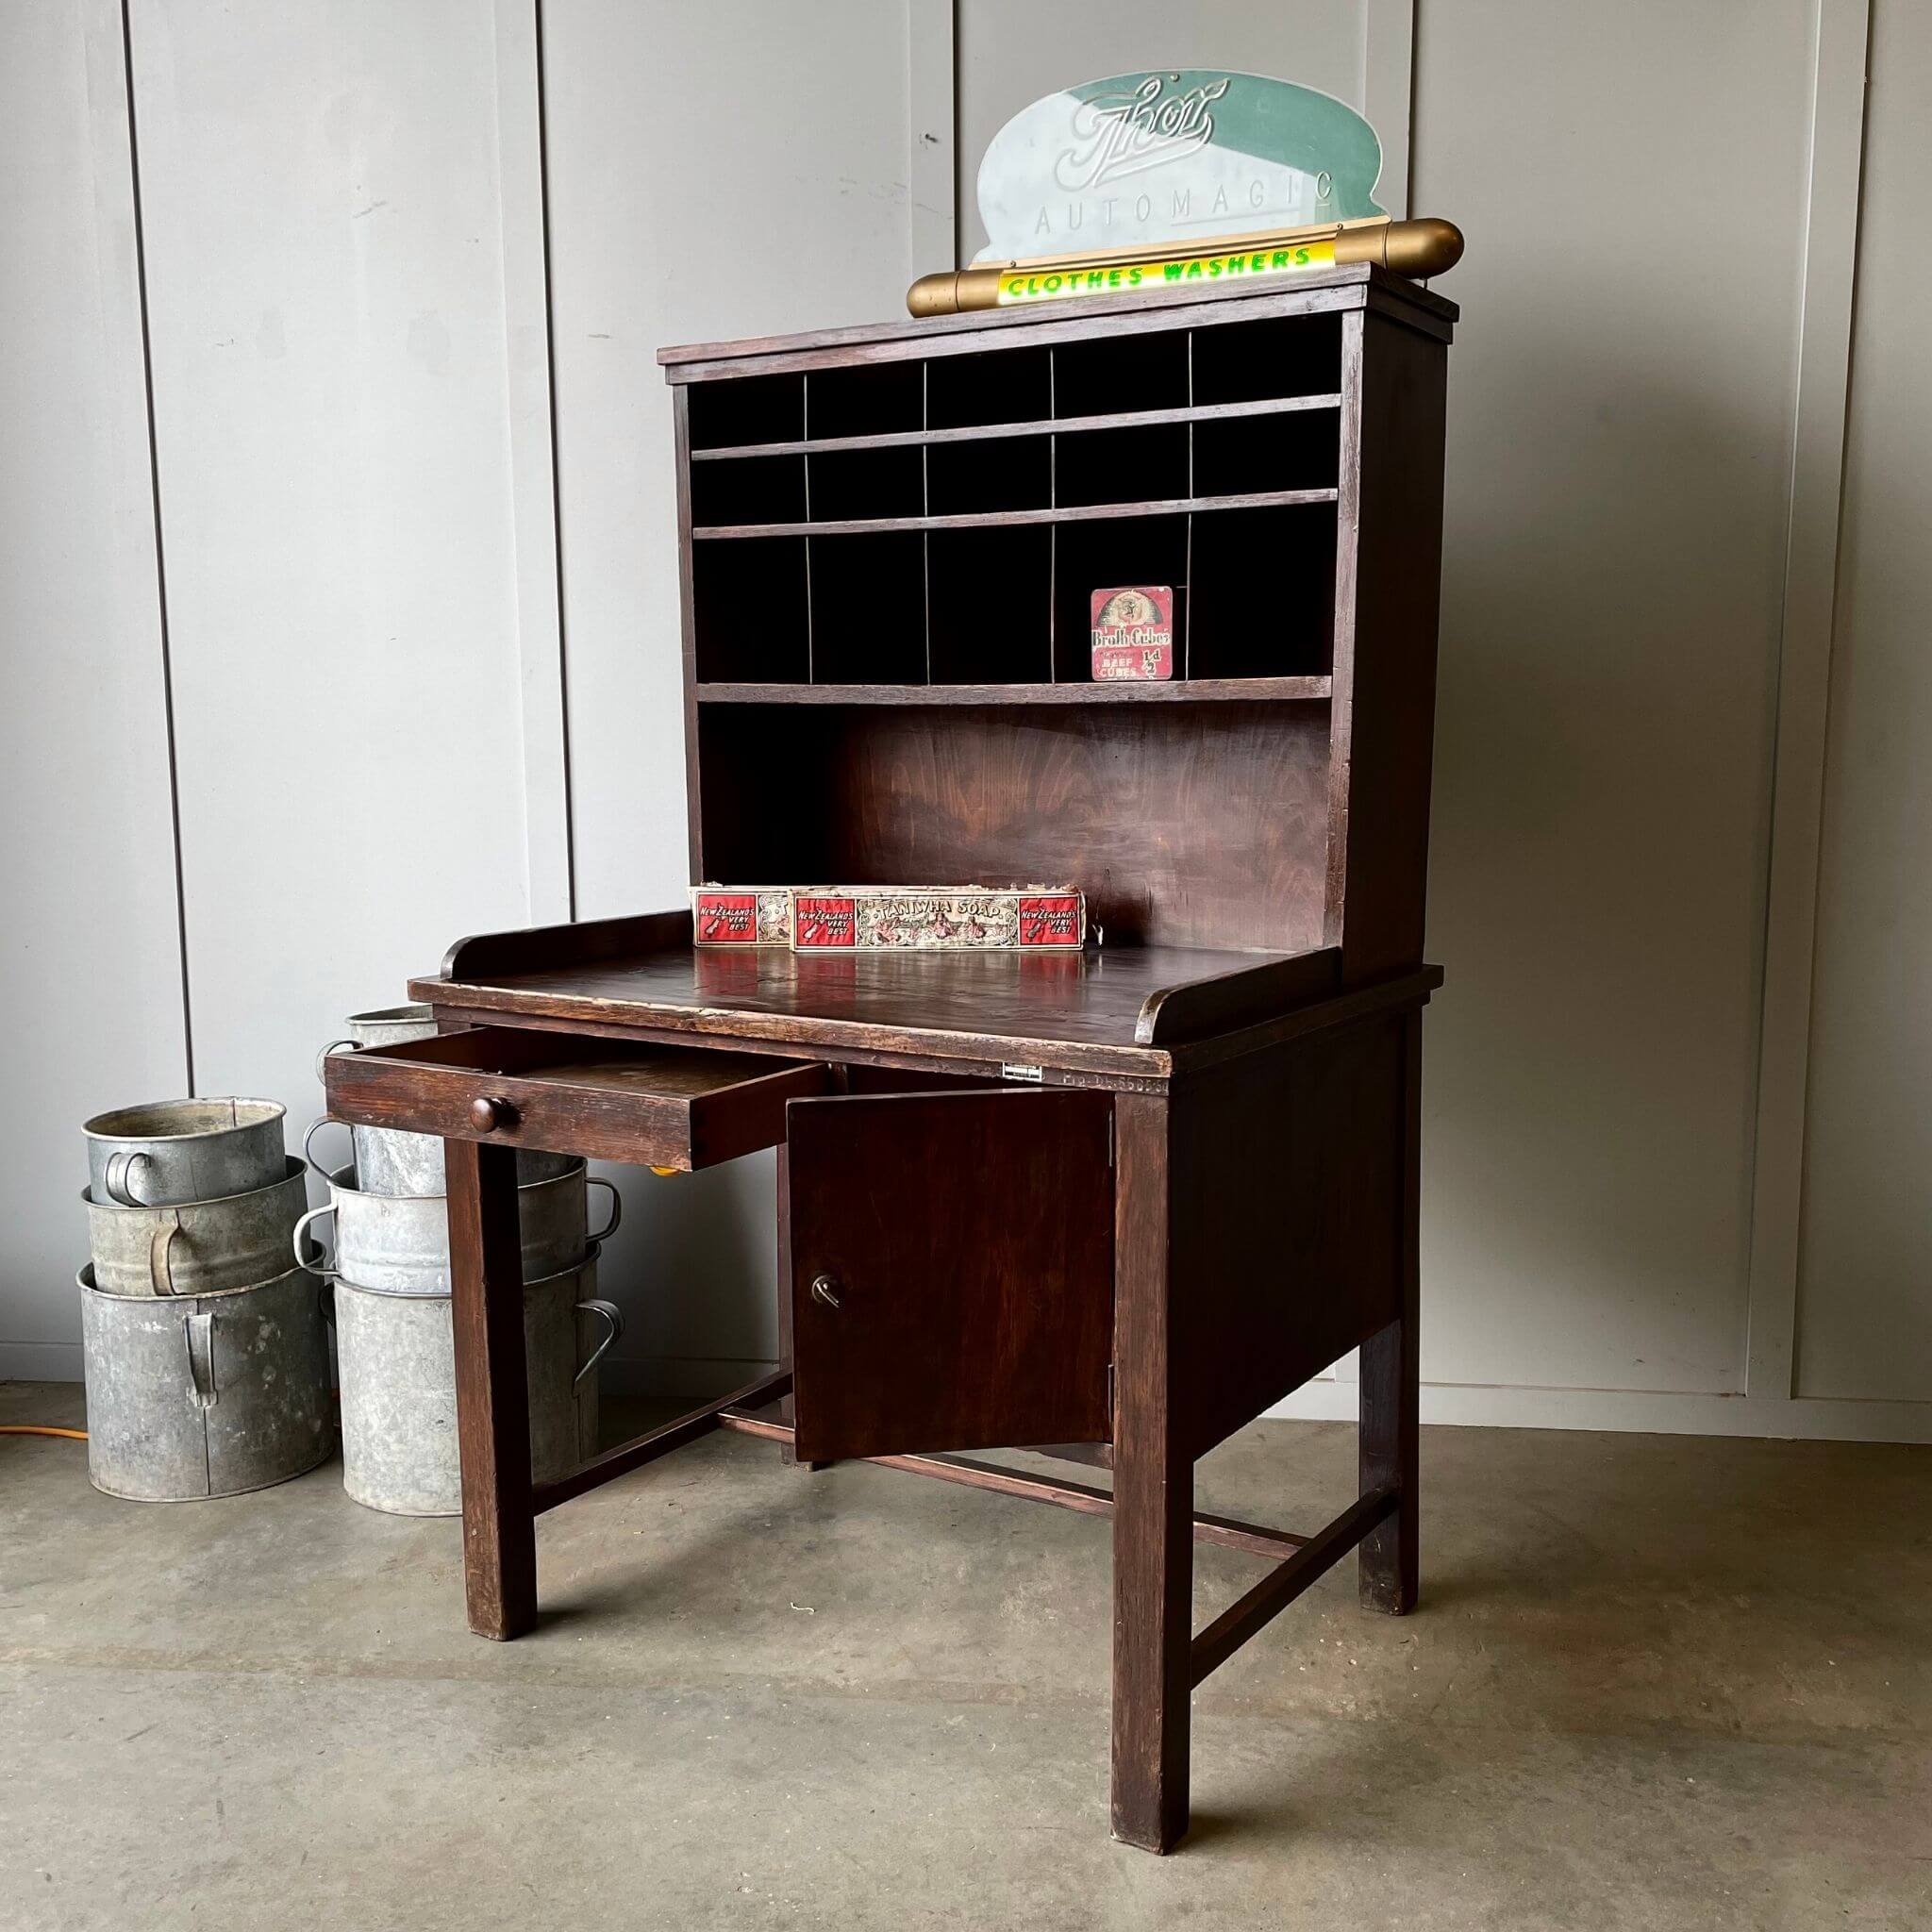 Antique post office table